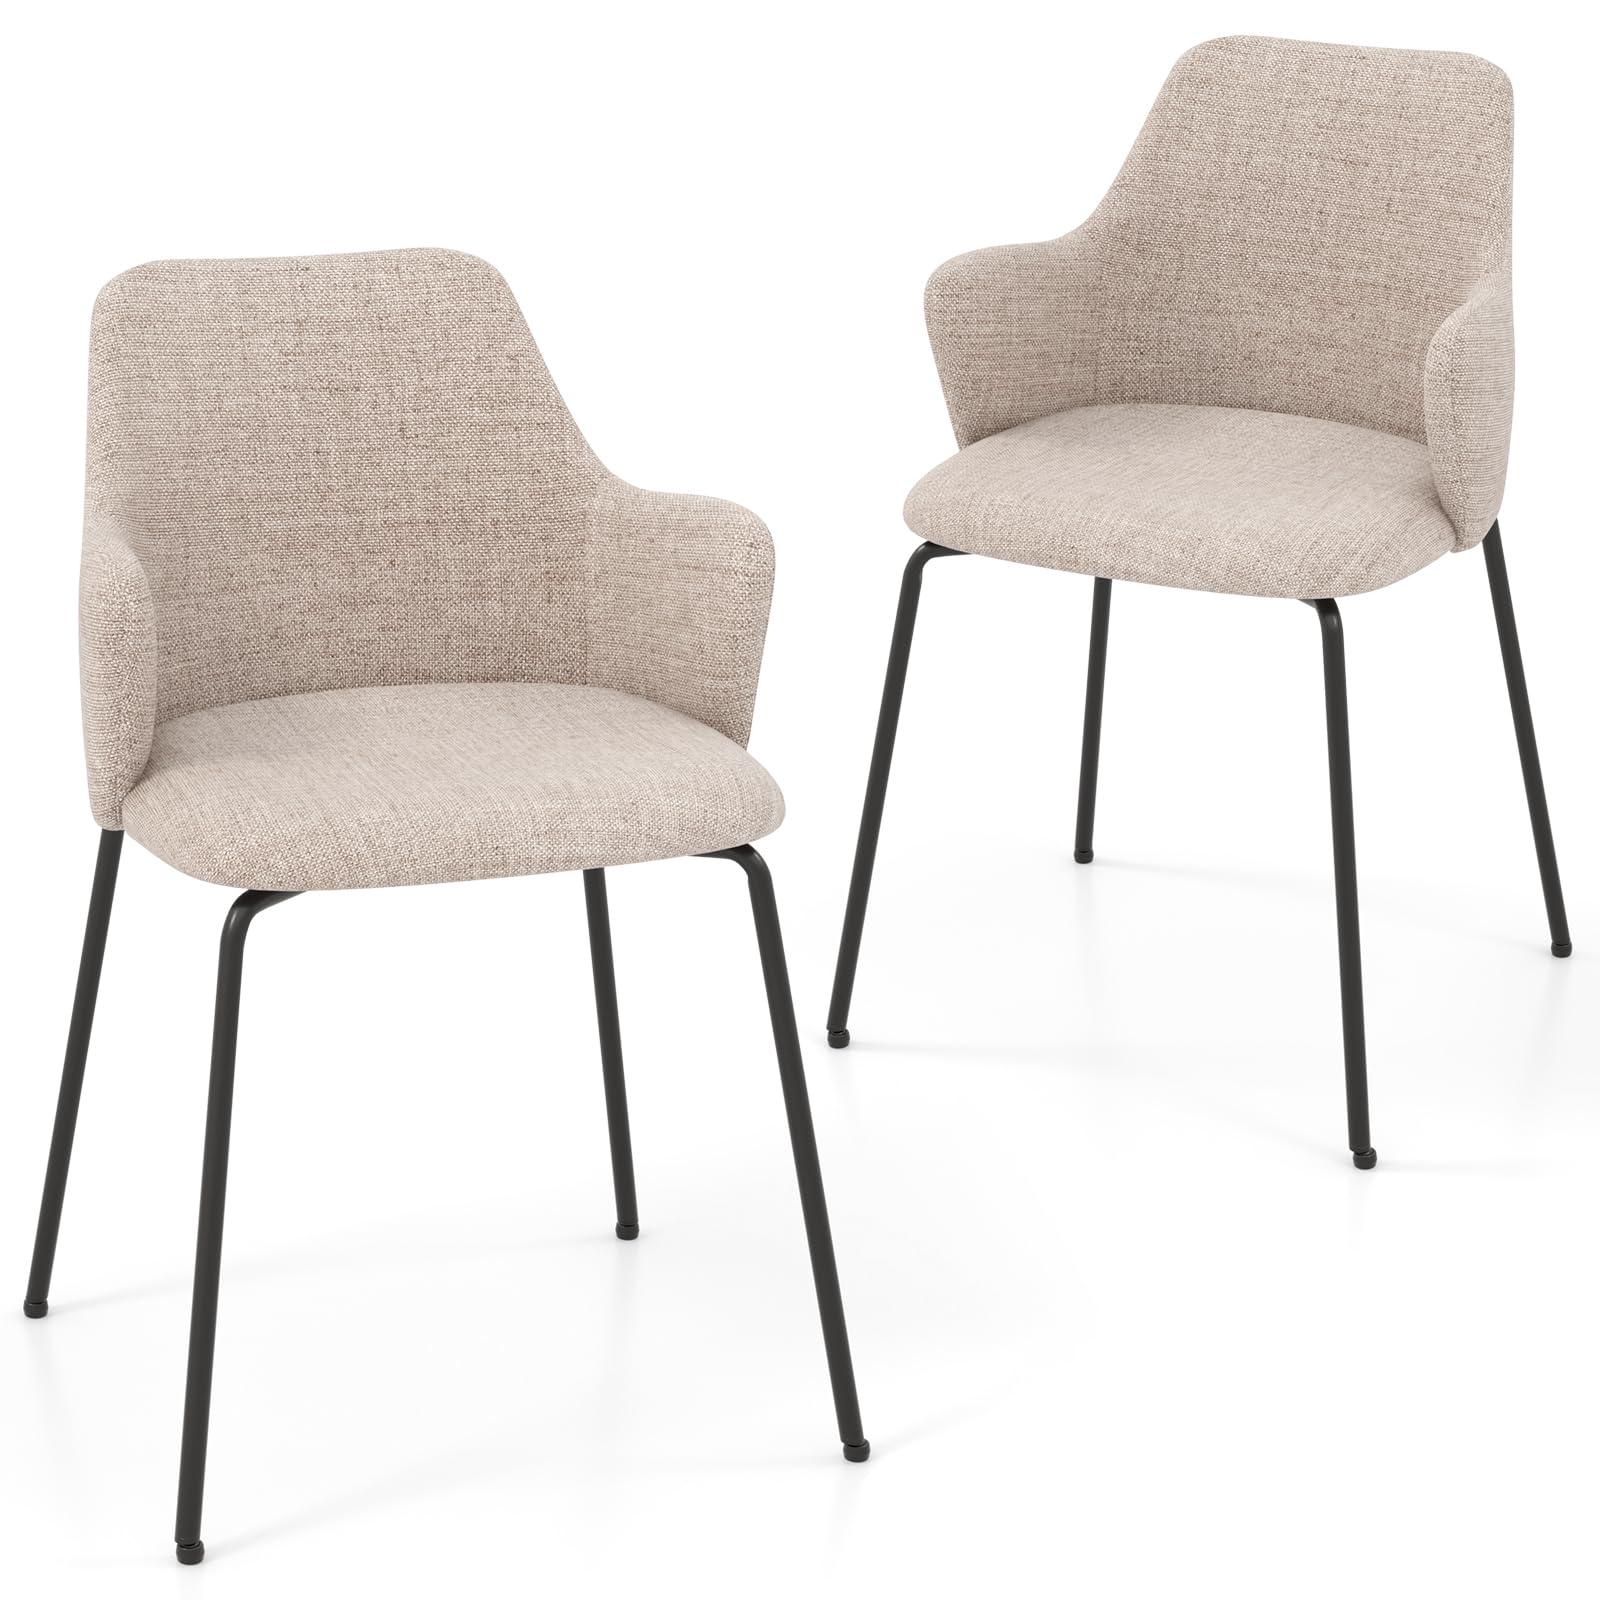 Giantex Dining Chairs Set, Upholstered Accent Chairs w/Curved Backrest